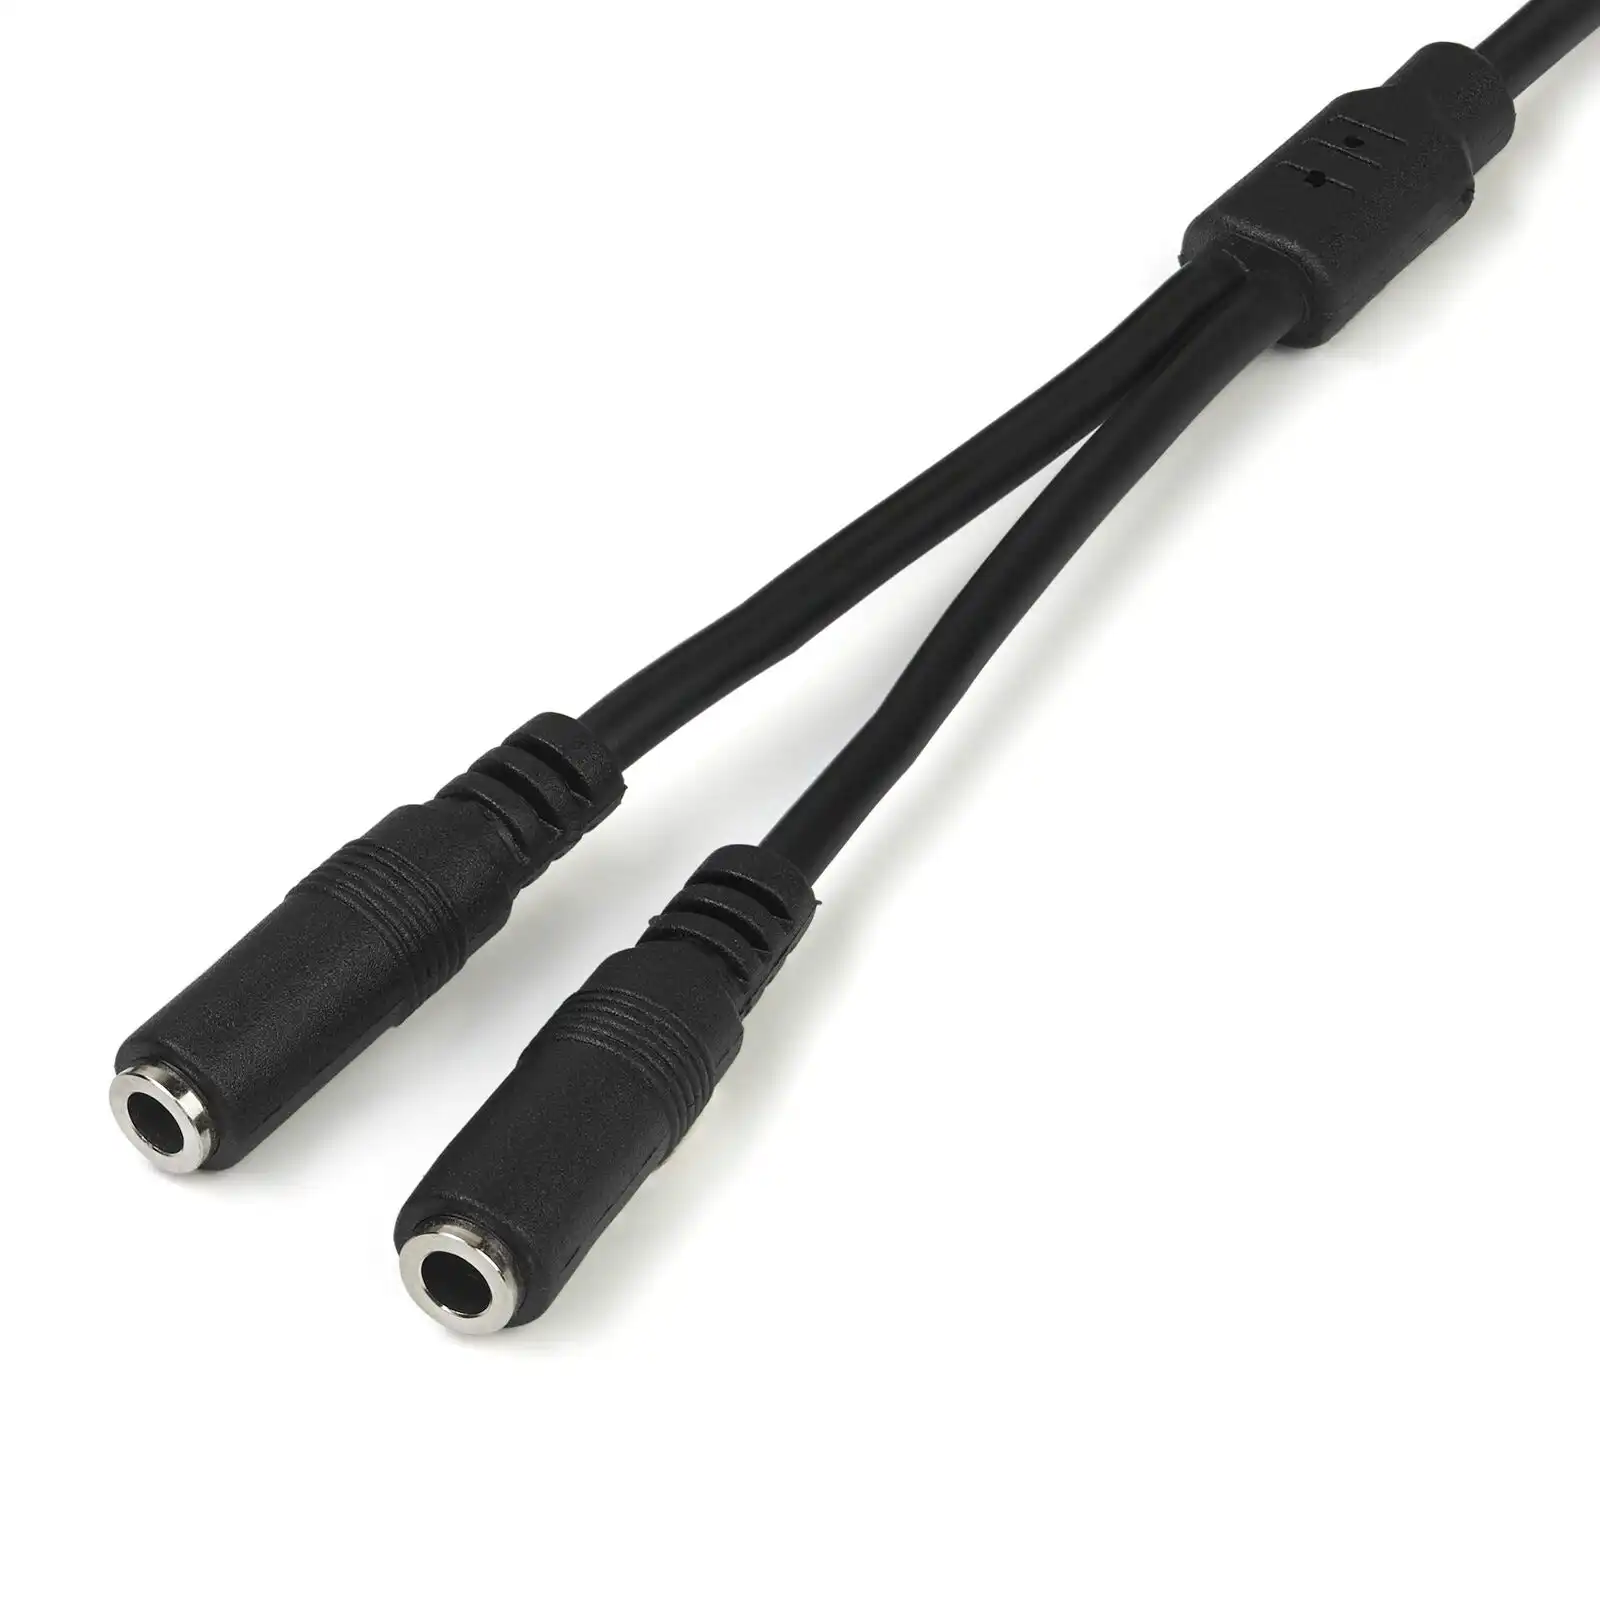 Star Tech Slim Stereo Splitter/Y-Cable Headphone Jack Male to 2x 3.5mm Female